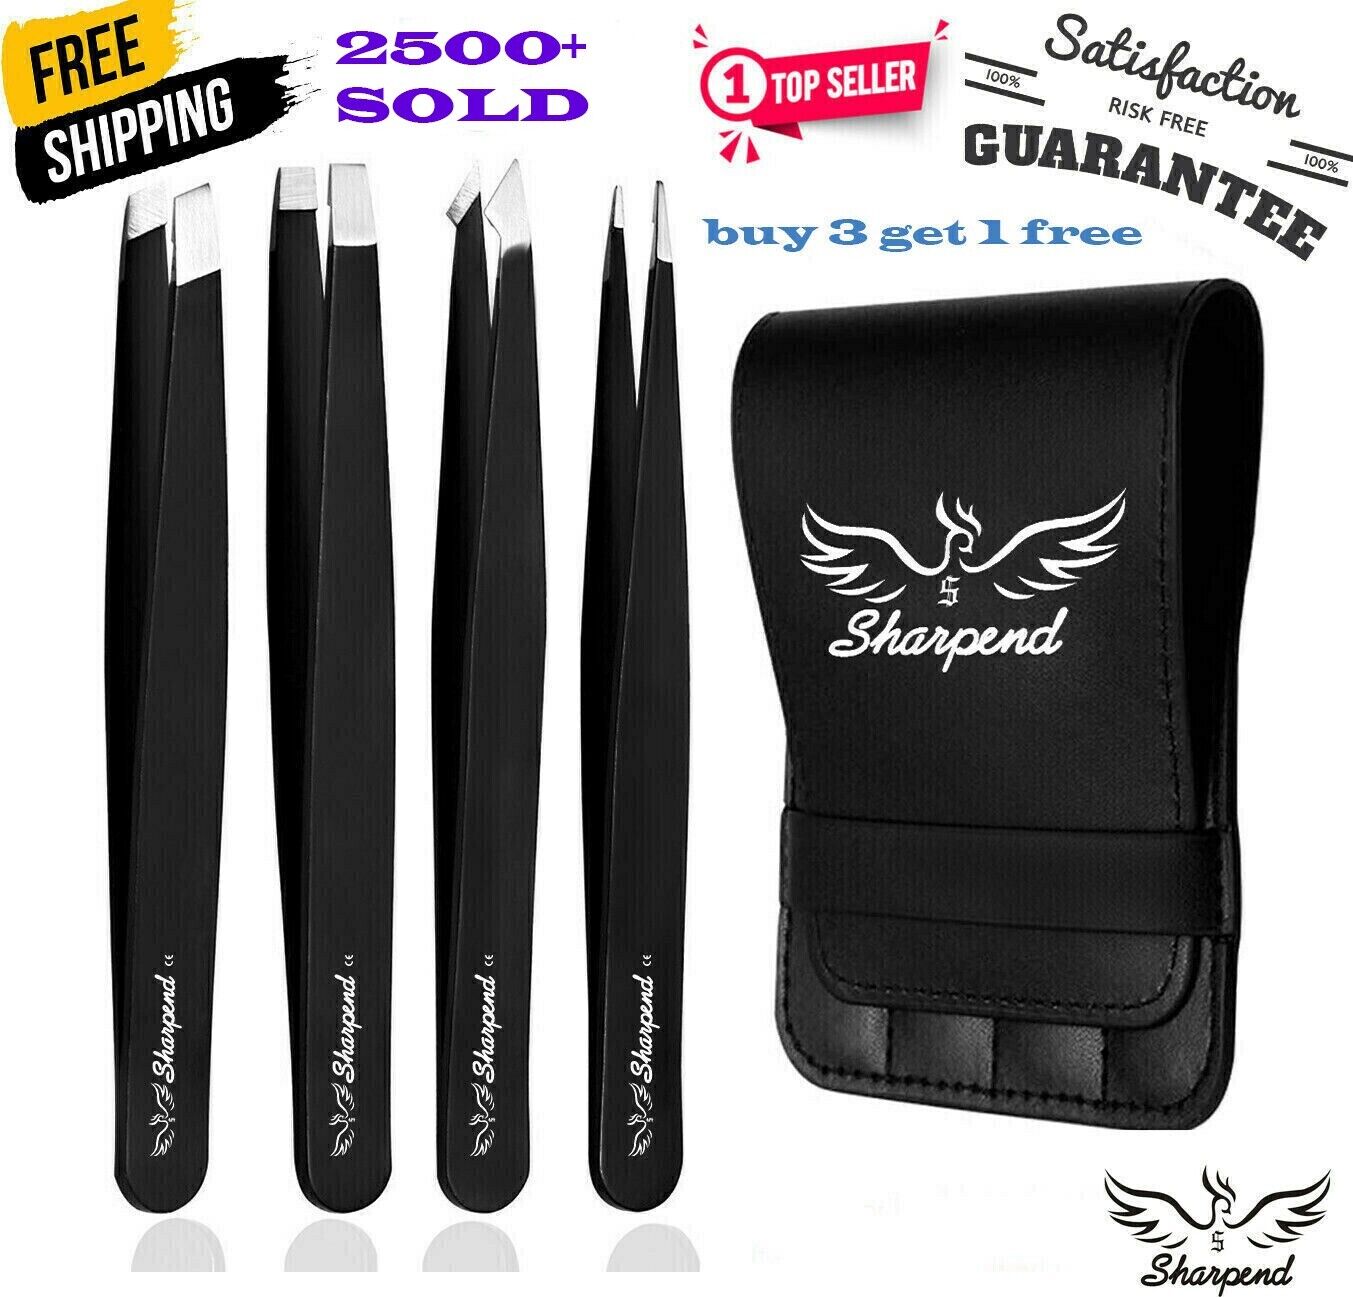 SHARPEND Tweezers Set 4-Piece Professional Stainless Eyebrow Hair Pluckers +Case SHARPEND DOES NOT APPLY